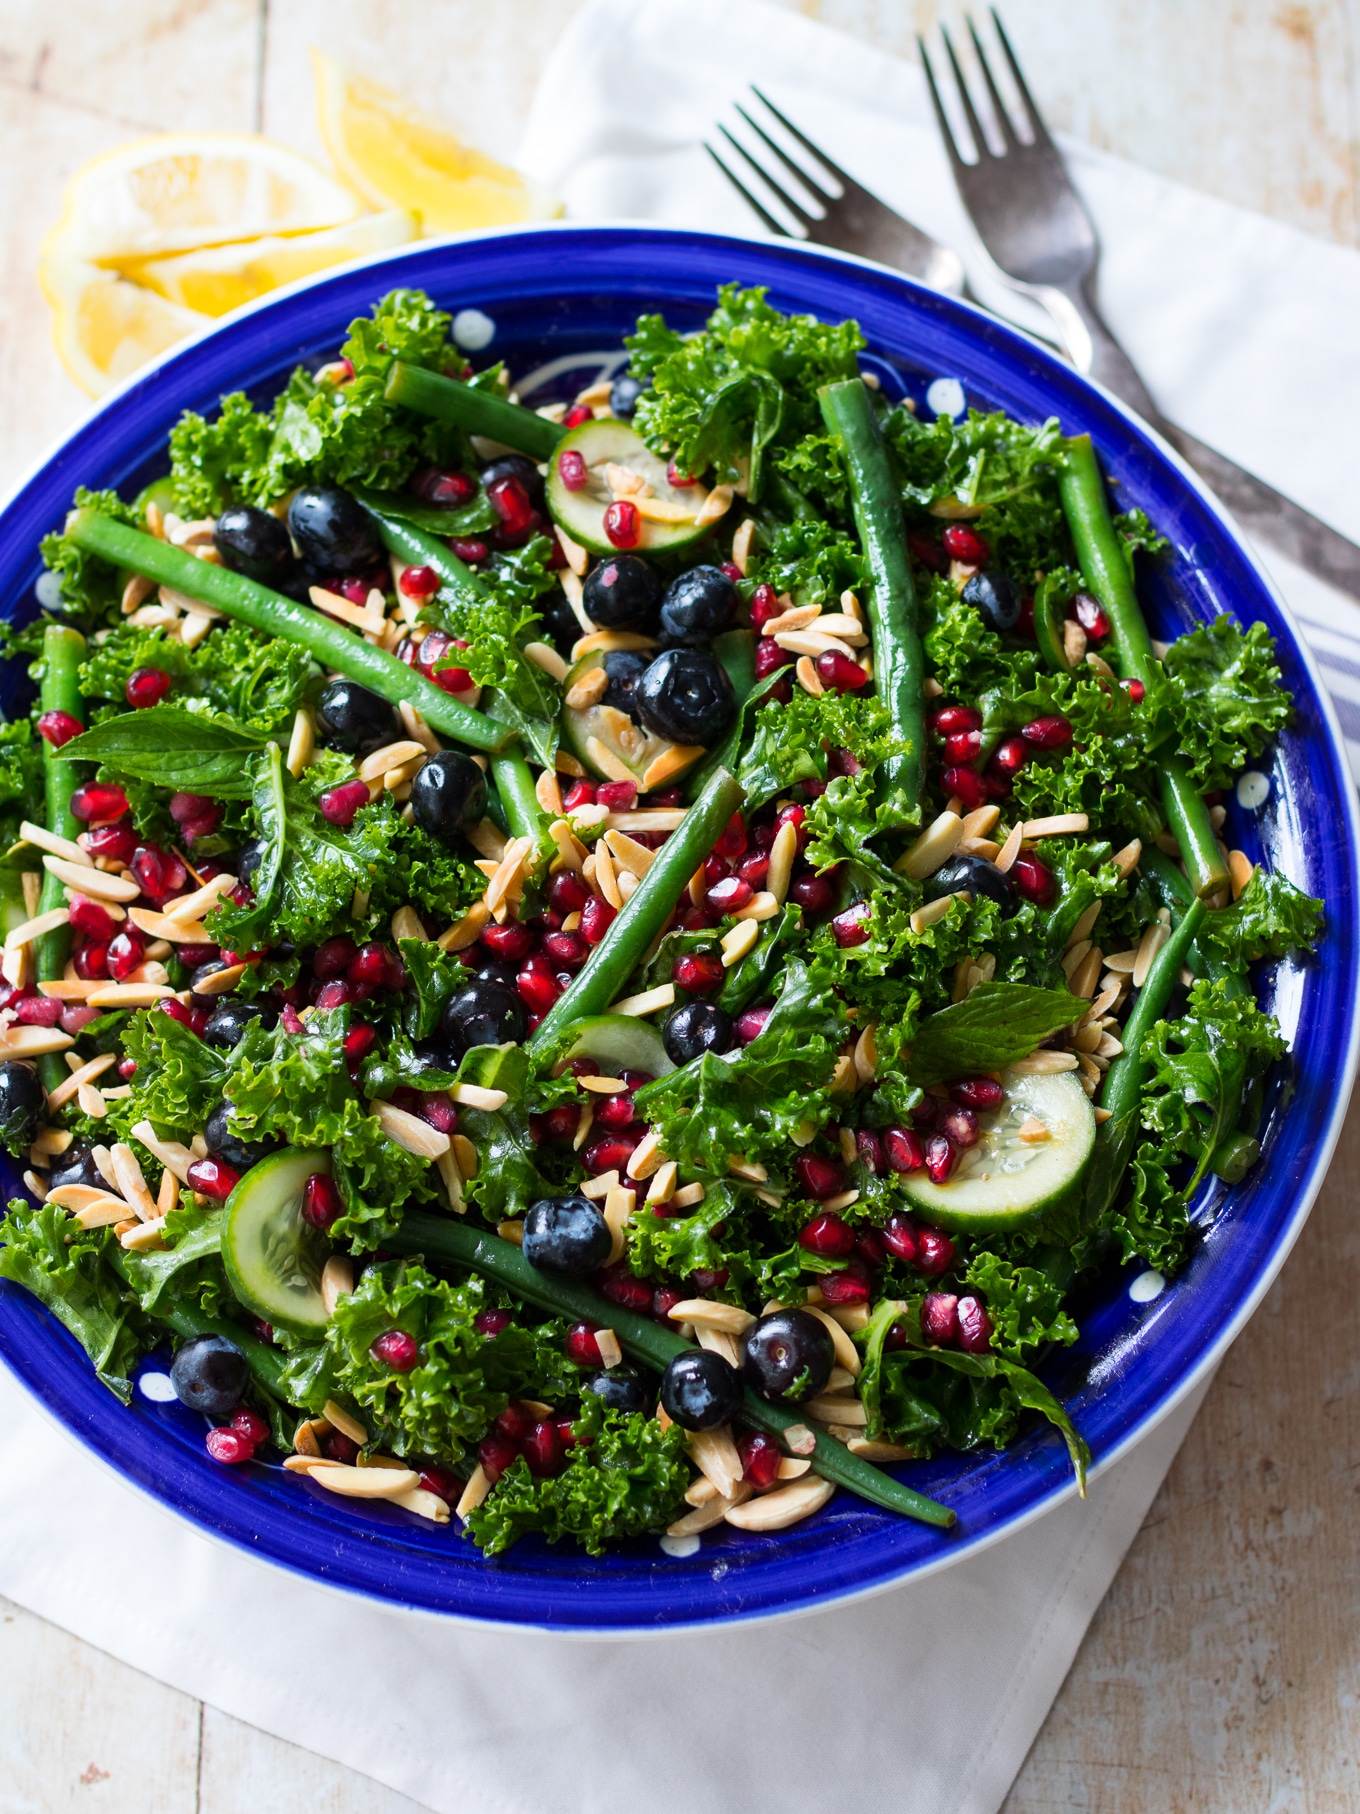 Fresh and vibrant this summery blueberry kale salad combines loads of healthy greens, blueberries and pomegranate. {gluten free, dairy free, grain free, paleo} #kalesalad #blueberries #paleo #healthyrecipe